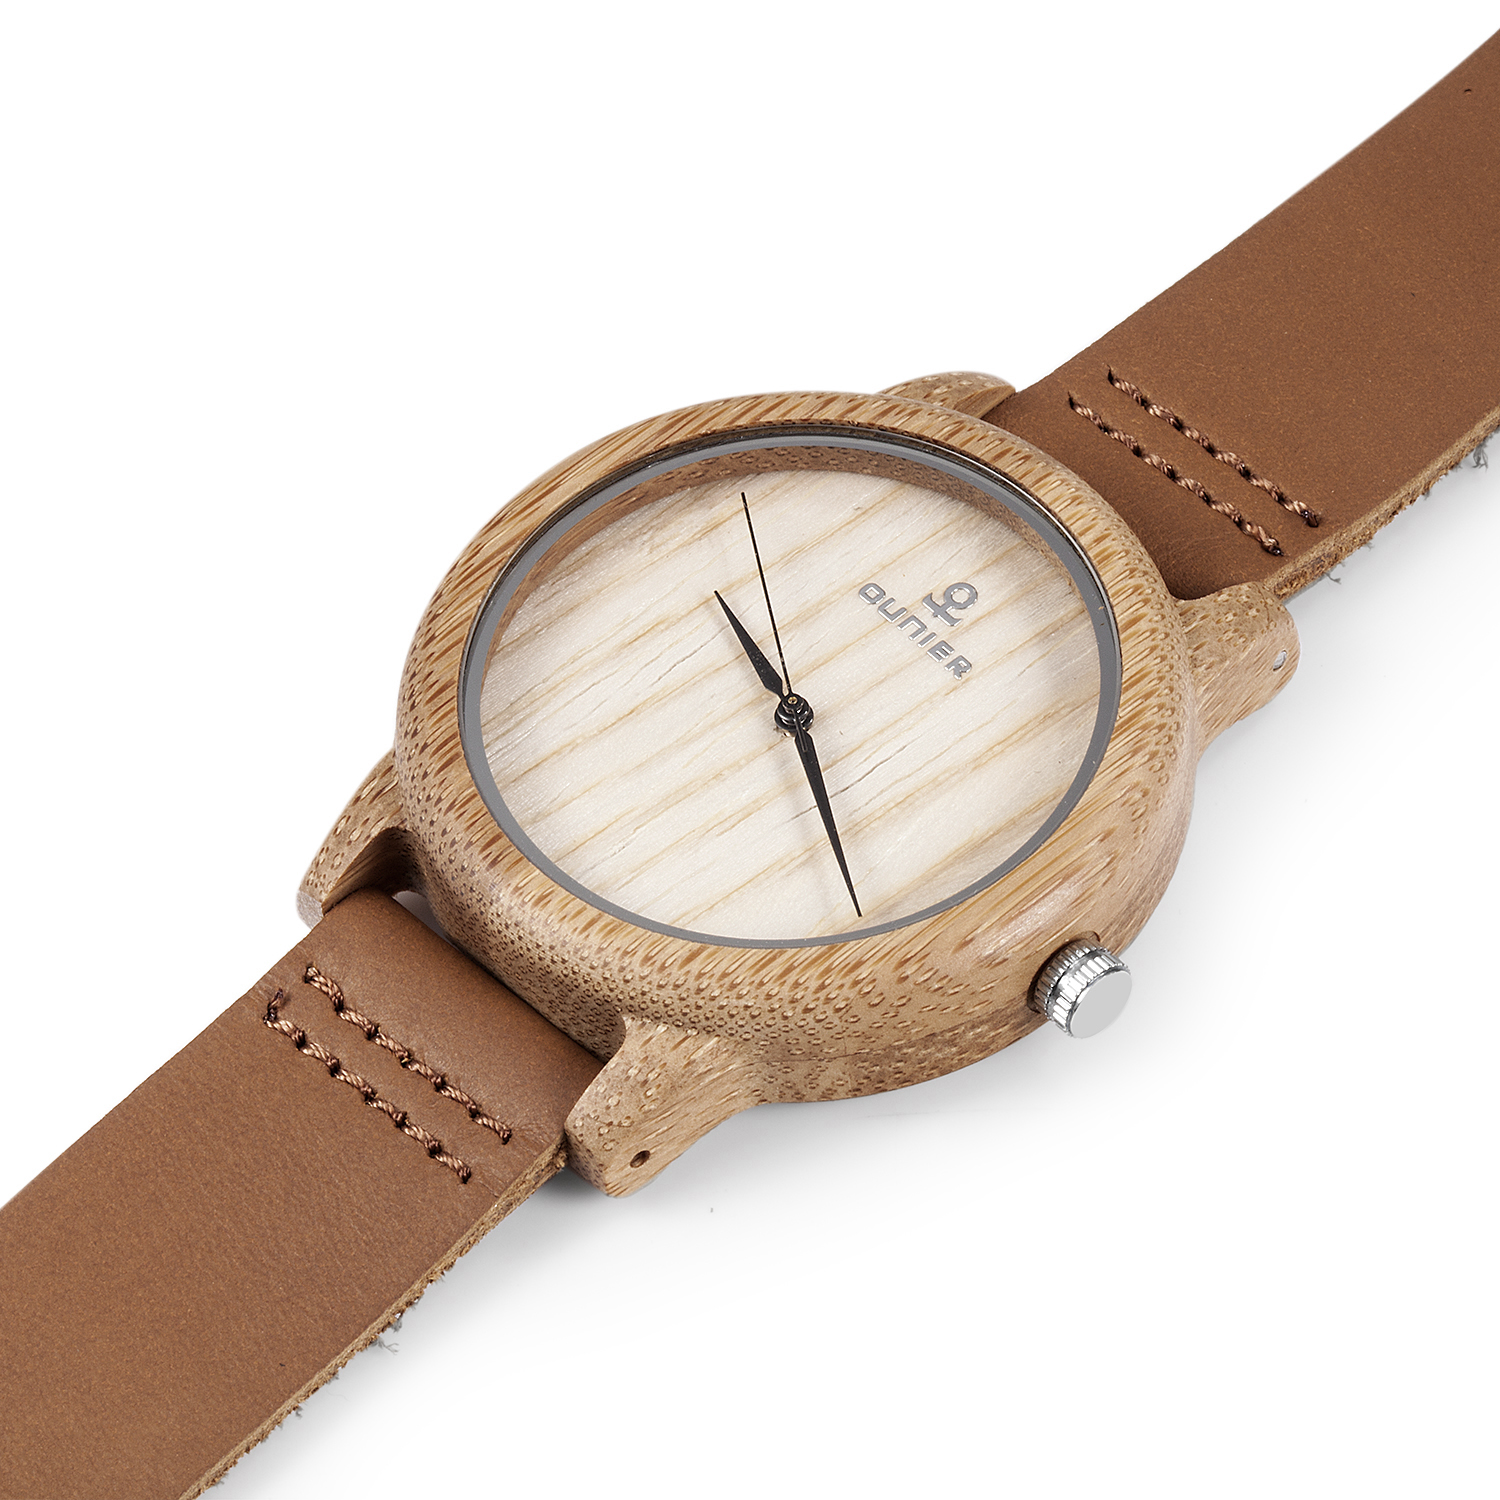 Bamboo case watch with leather band